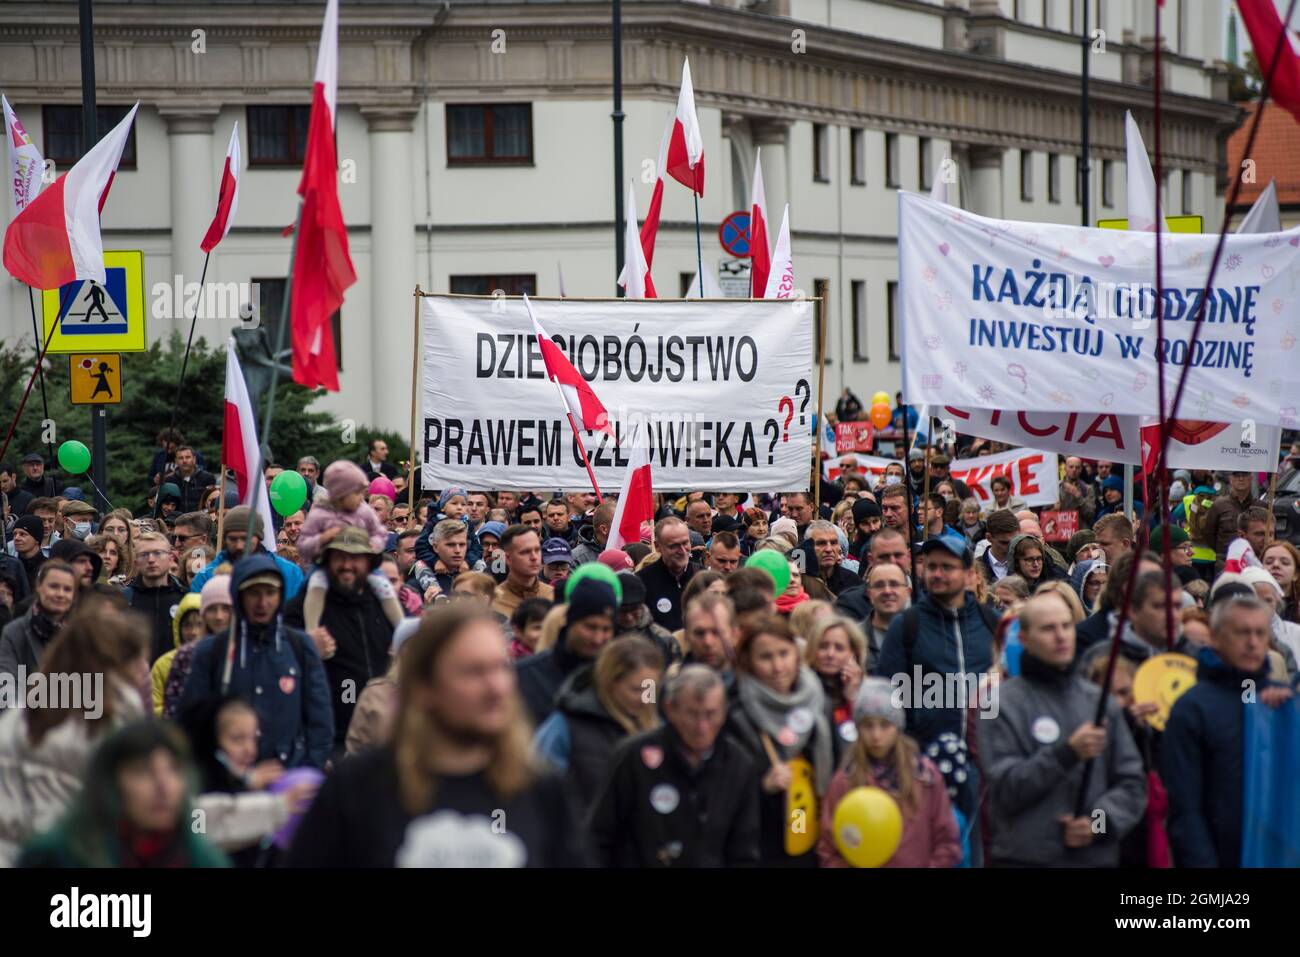 Warsaw, Poland. 19th Sep, 2021. Marchers wave flags during the rally in Warsaw.Thousands of people took part in the XVI National March of Life and Family (Narodowy Marsz Zycia i Rodziny) in Warsaw which was held under the slogan 'Dad - be, lead, protect'. As the organizers of the event announced earlier, it was aimed at manifesting pro-family attitudes and pro-life values. The event's main organizer was the Center of Life and Family. Credit: SOPA Images Limited/Alamy Live News Stock Photo